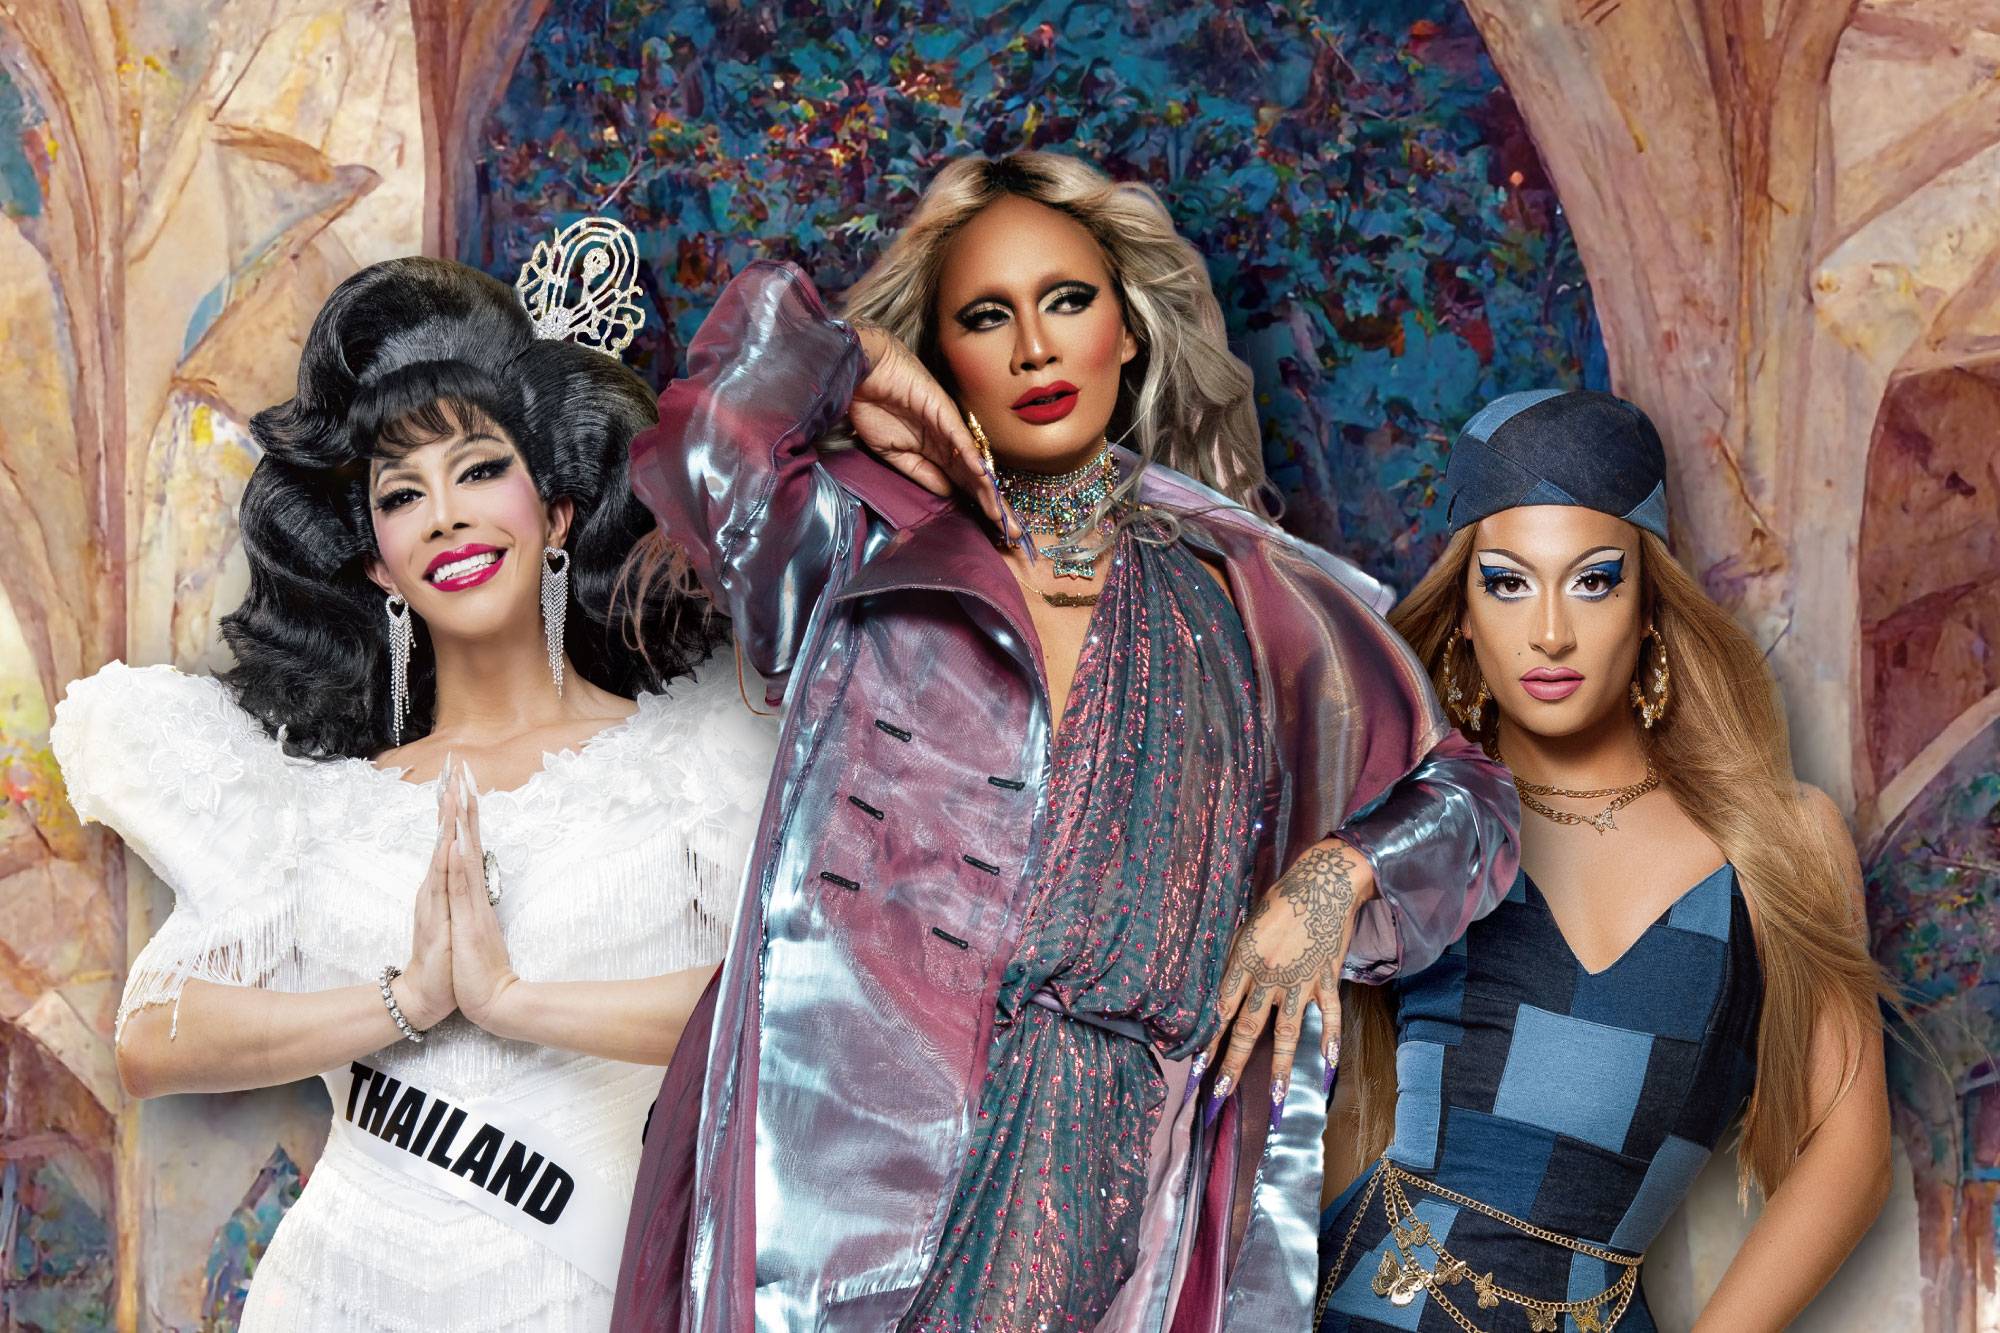 The pop culture phenomenon that is RuPaul's Drag Race, explained - Vox